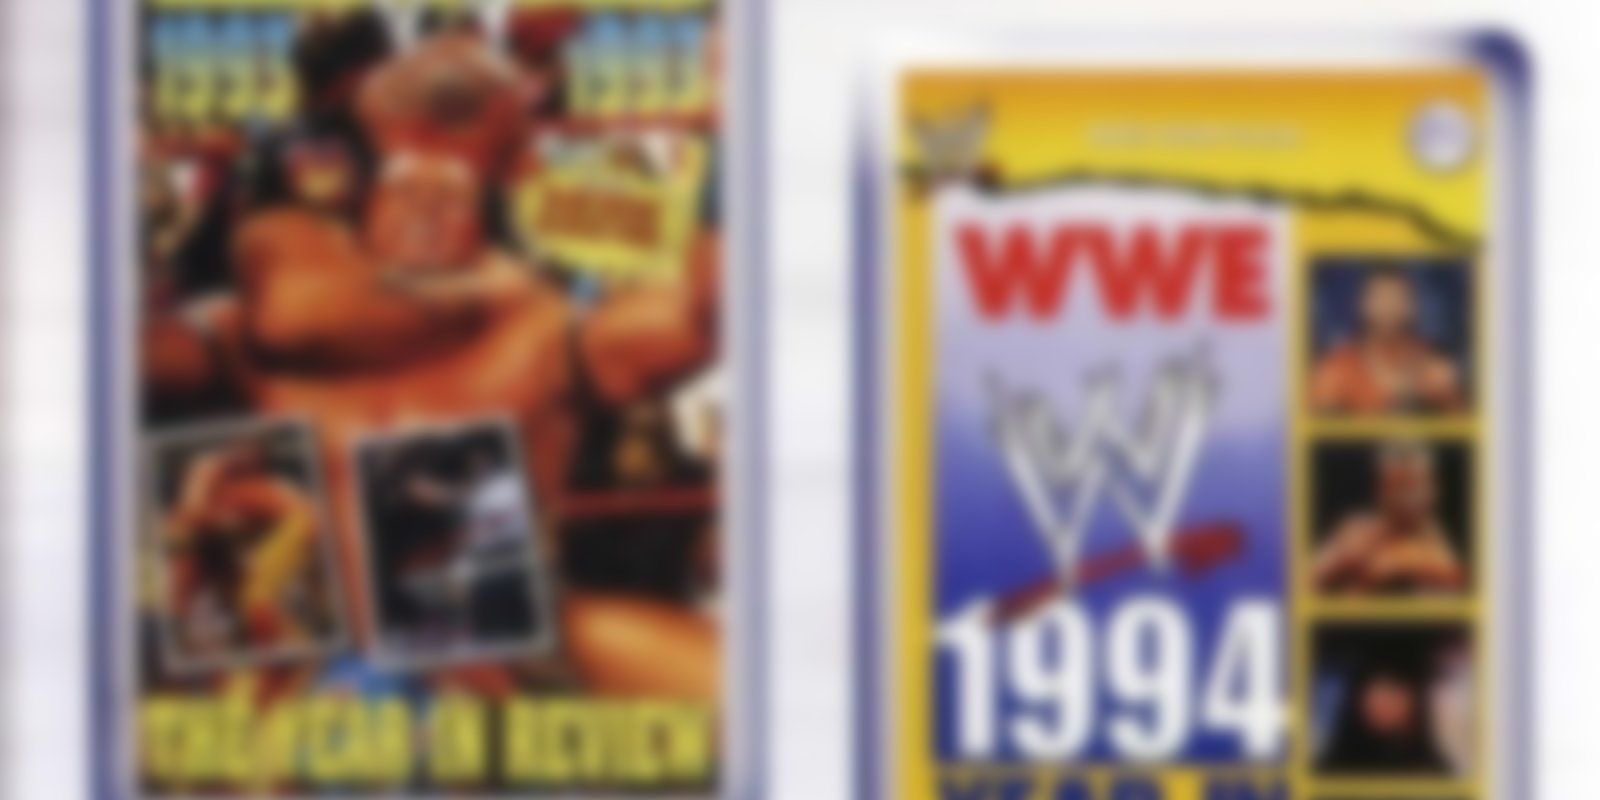 WWE - The Year In Review 1993 & 1994